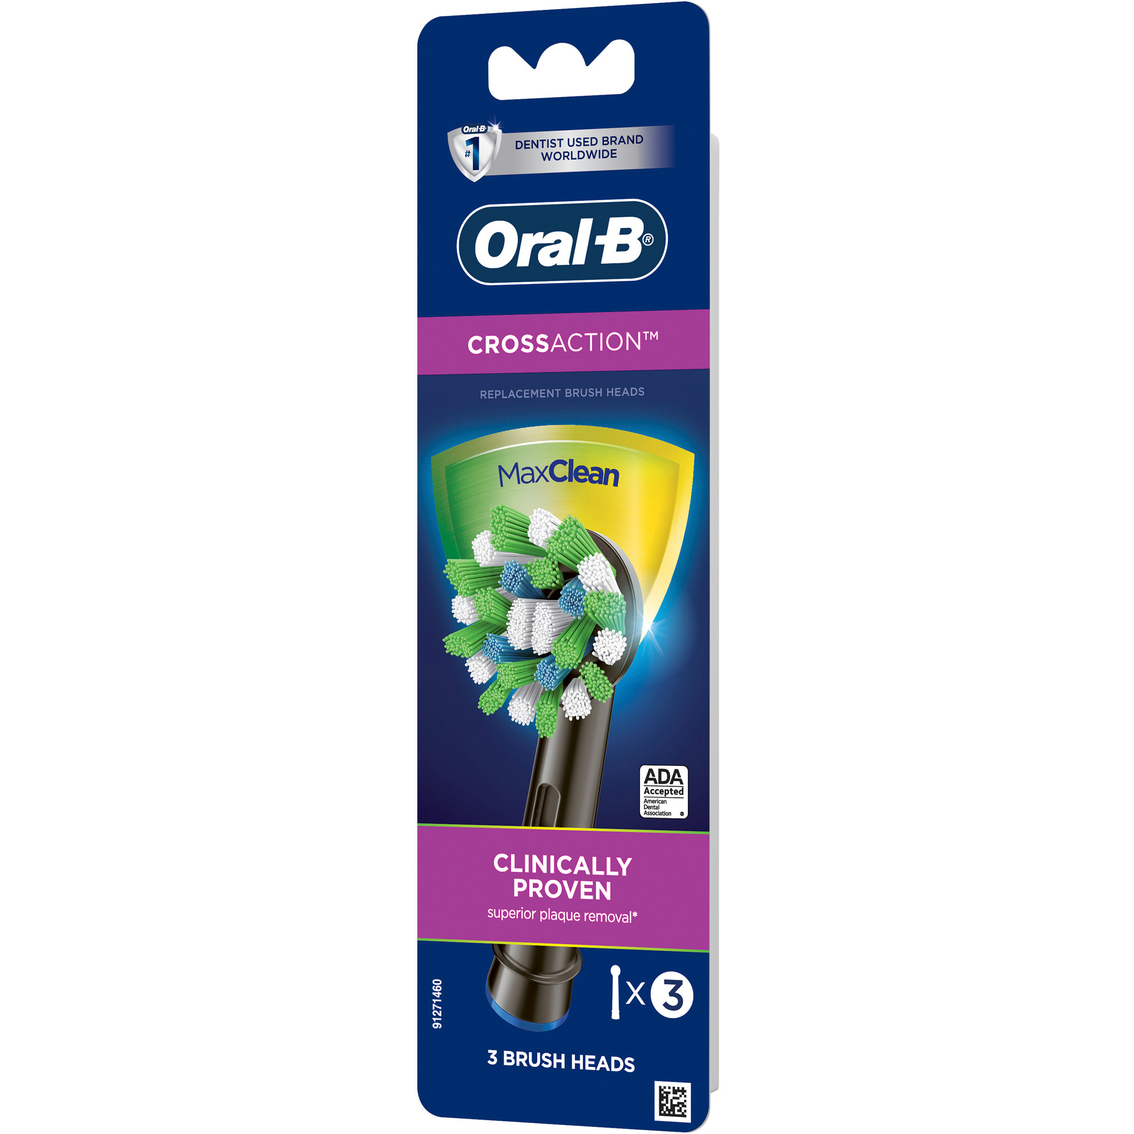 Oral-B CrossAction Electric Toothbrush Replacement Brush Heads 3 ct. - Image 1 of 2